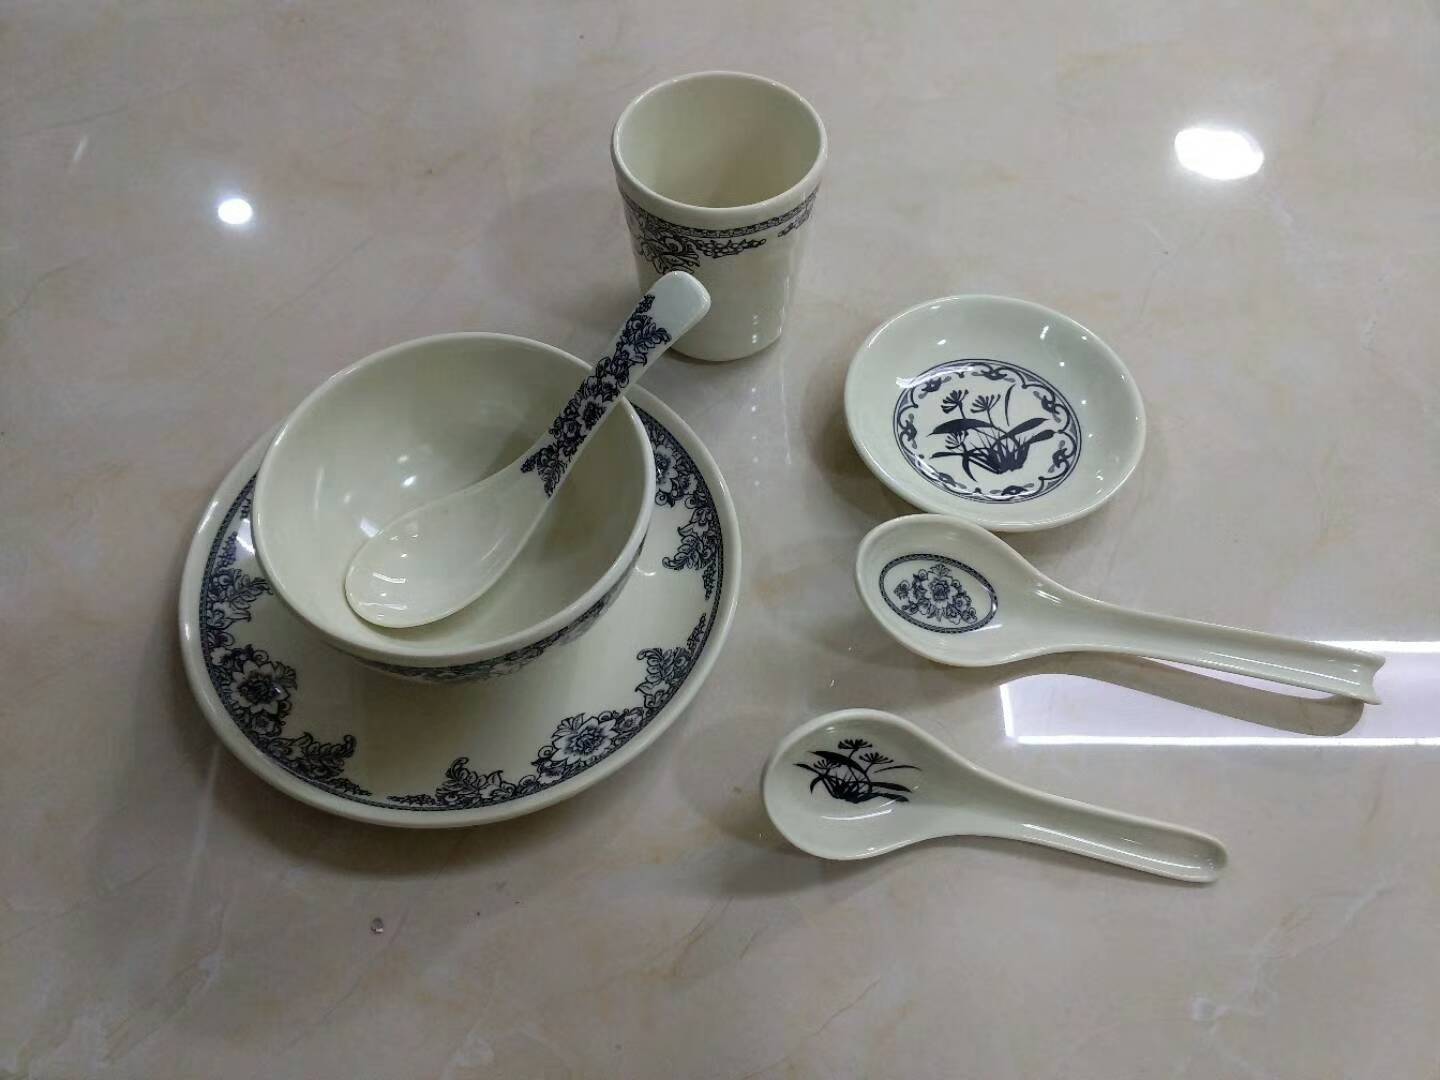 Melamine tableware should be replaced when there is a crack